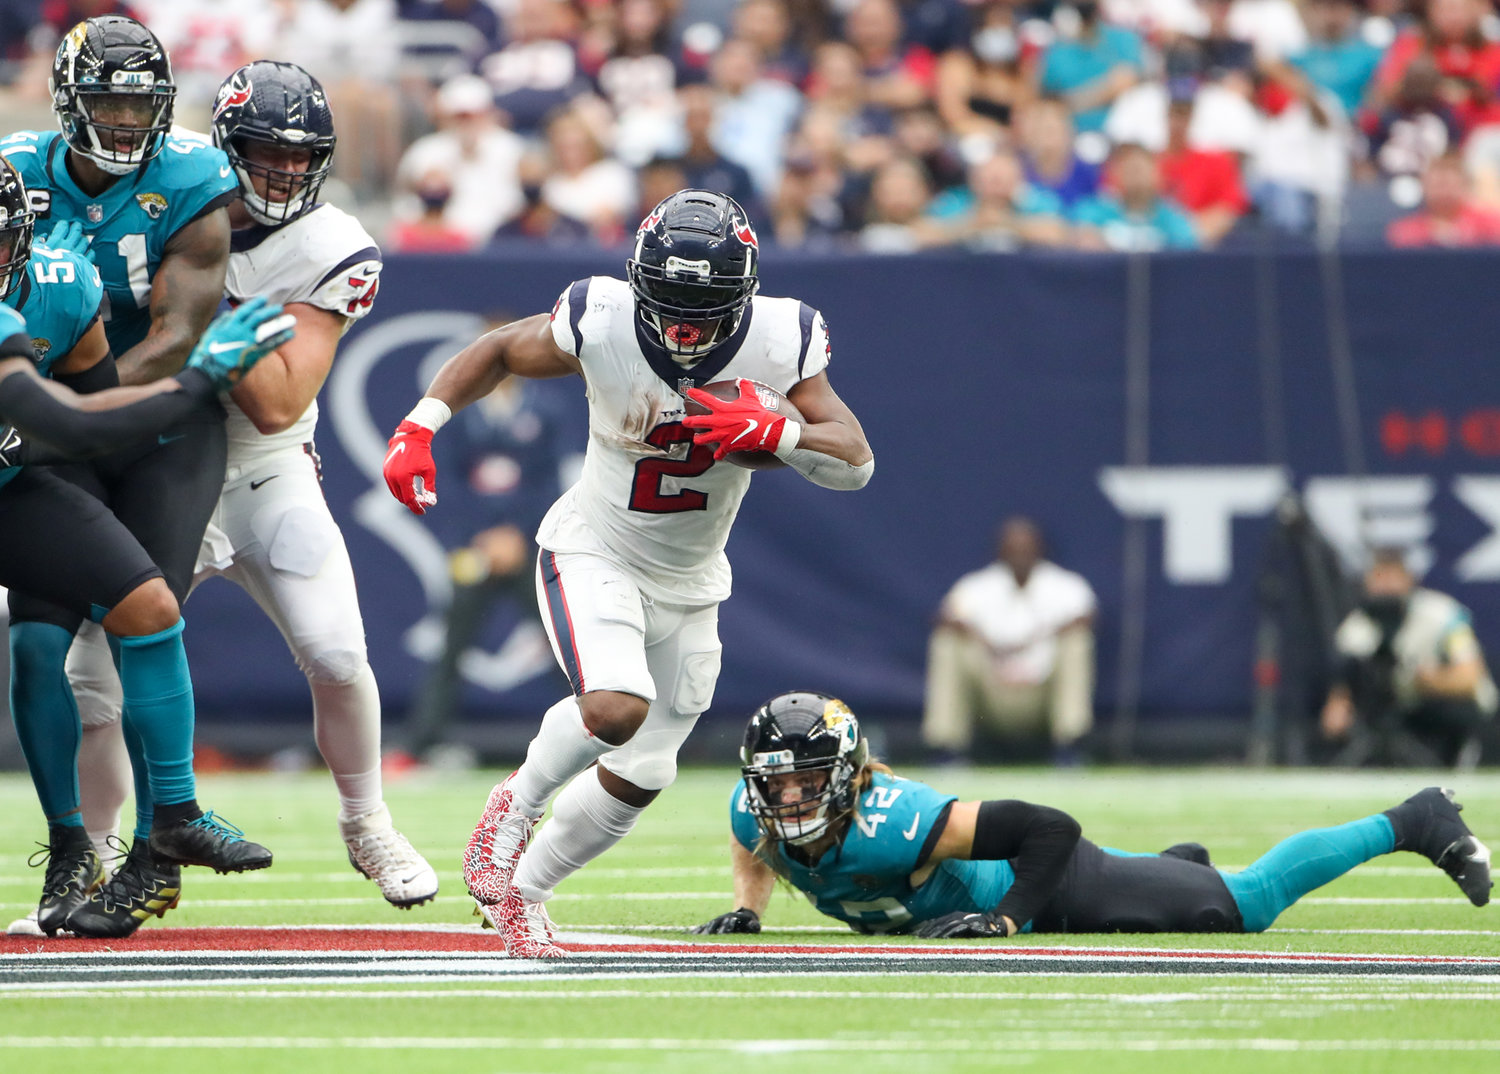 Houston Texans running back Mark Ingram (2) carries the ball during the second half of an NFL game between the Houston Texans and the Jacksonville Jaguars on September 12, 2021 in Houston, Texas.